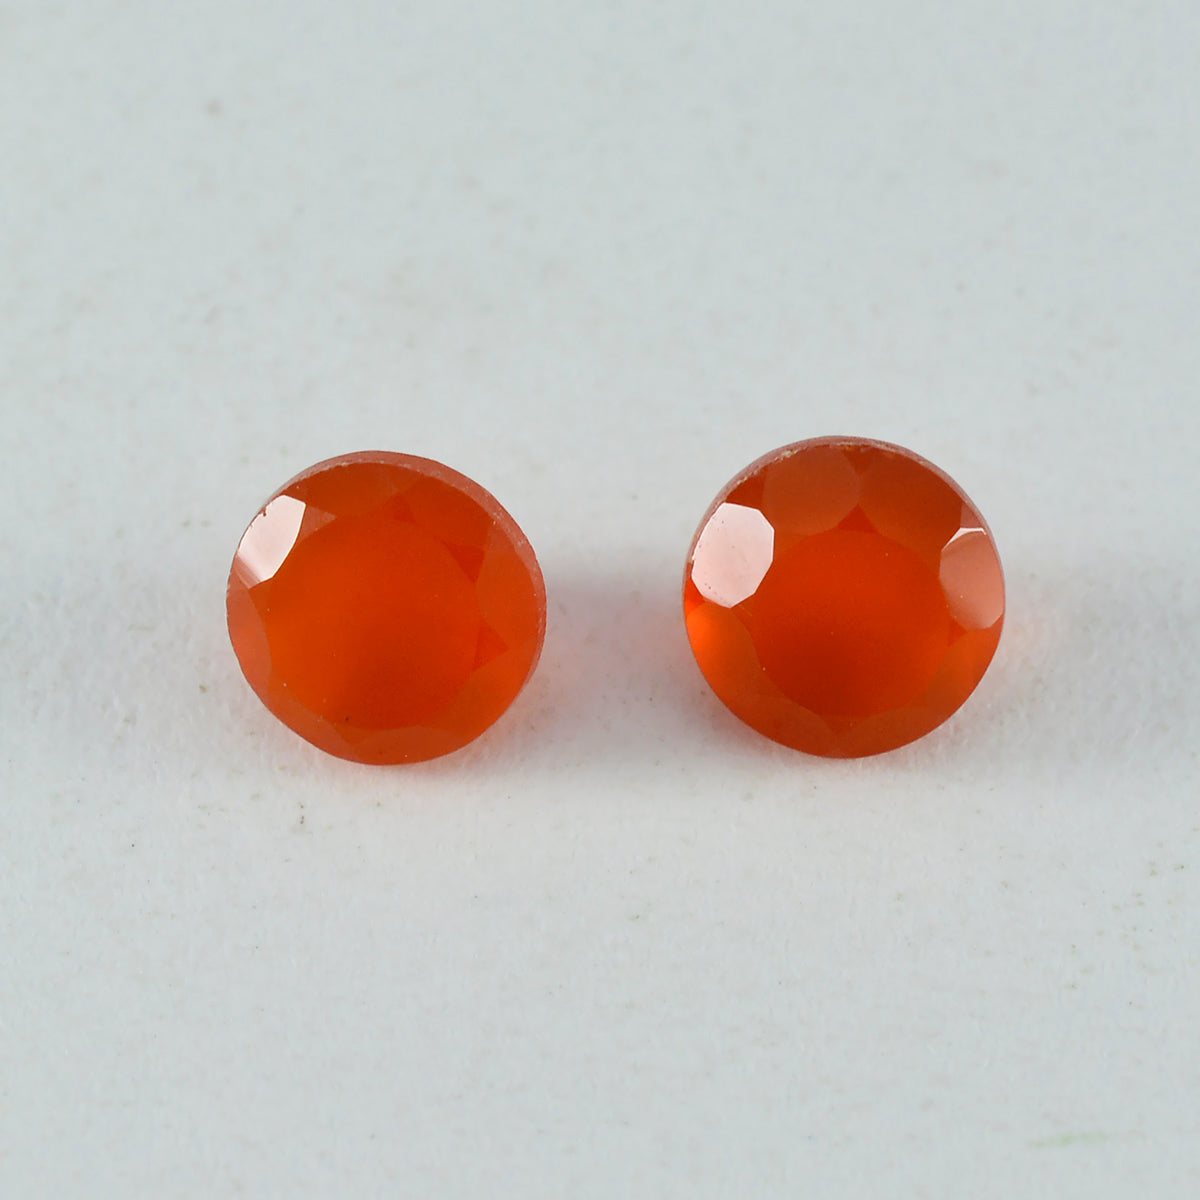 Riyogems 1PC Natural Red Onyx Faceted 11x11 mm Round Shape beautiful Quality Loose Gem